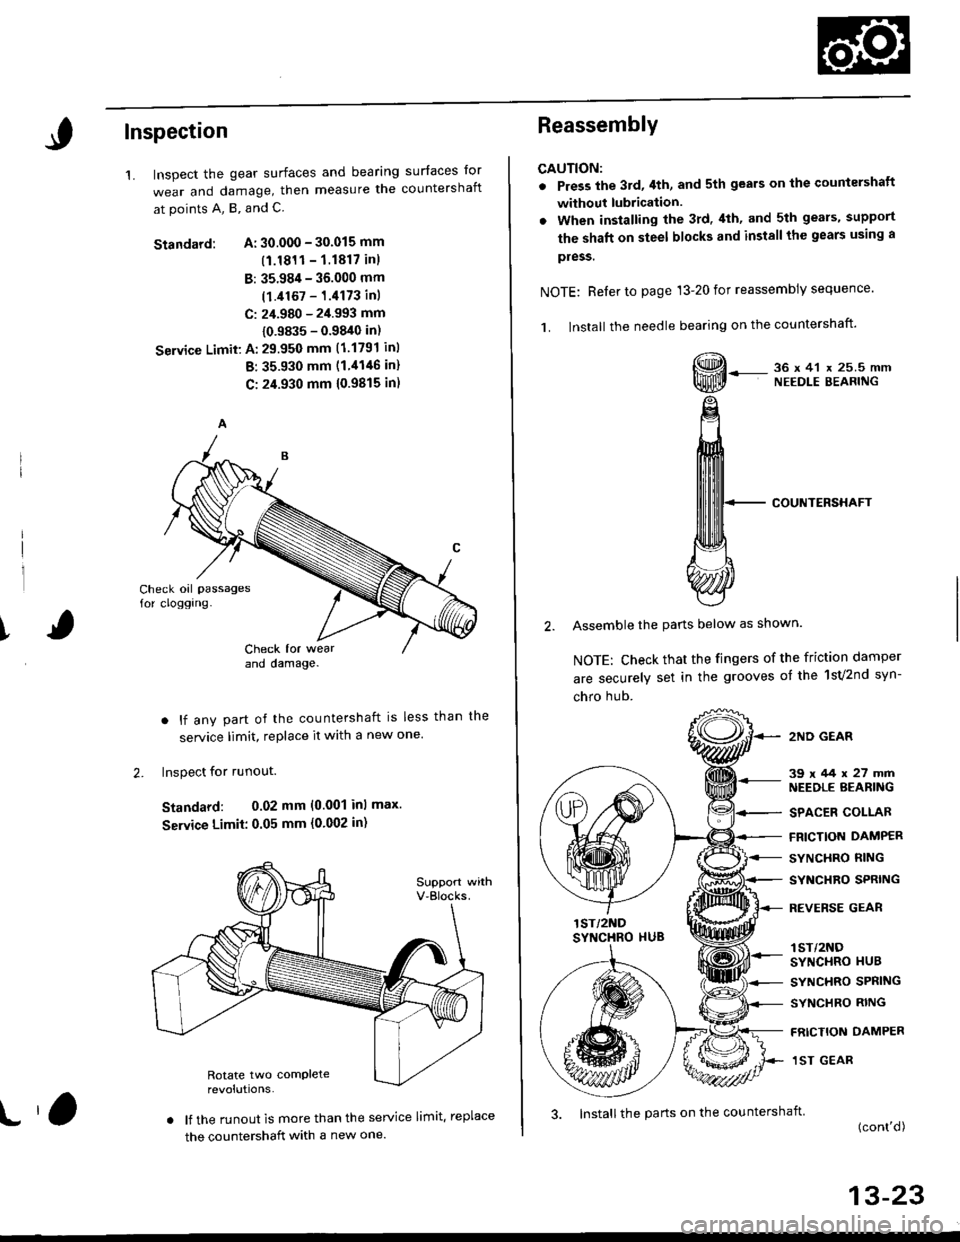 HONDA CIVIC 1998 6.G Owners Manual Inspection
1.surfaces lor
countershaftInspect the gear surfaces and bearang
wear and damage, then measure tne
at points A, B, and C.
Standard: A: 30.000 - 30.015 mm
(1.1811- 1.1817 inl
B: 35.984 - 36.